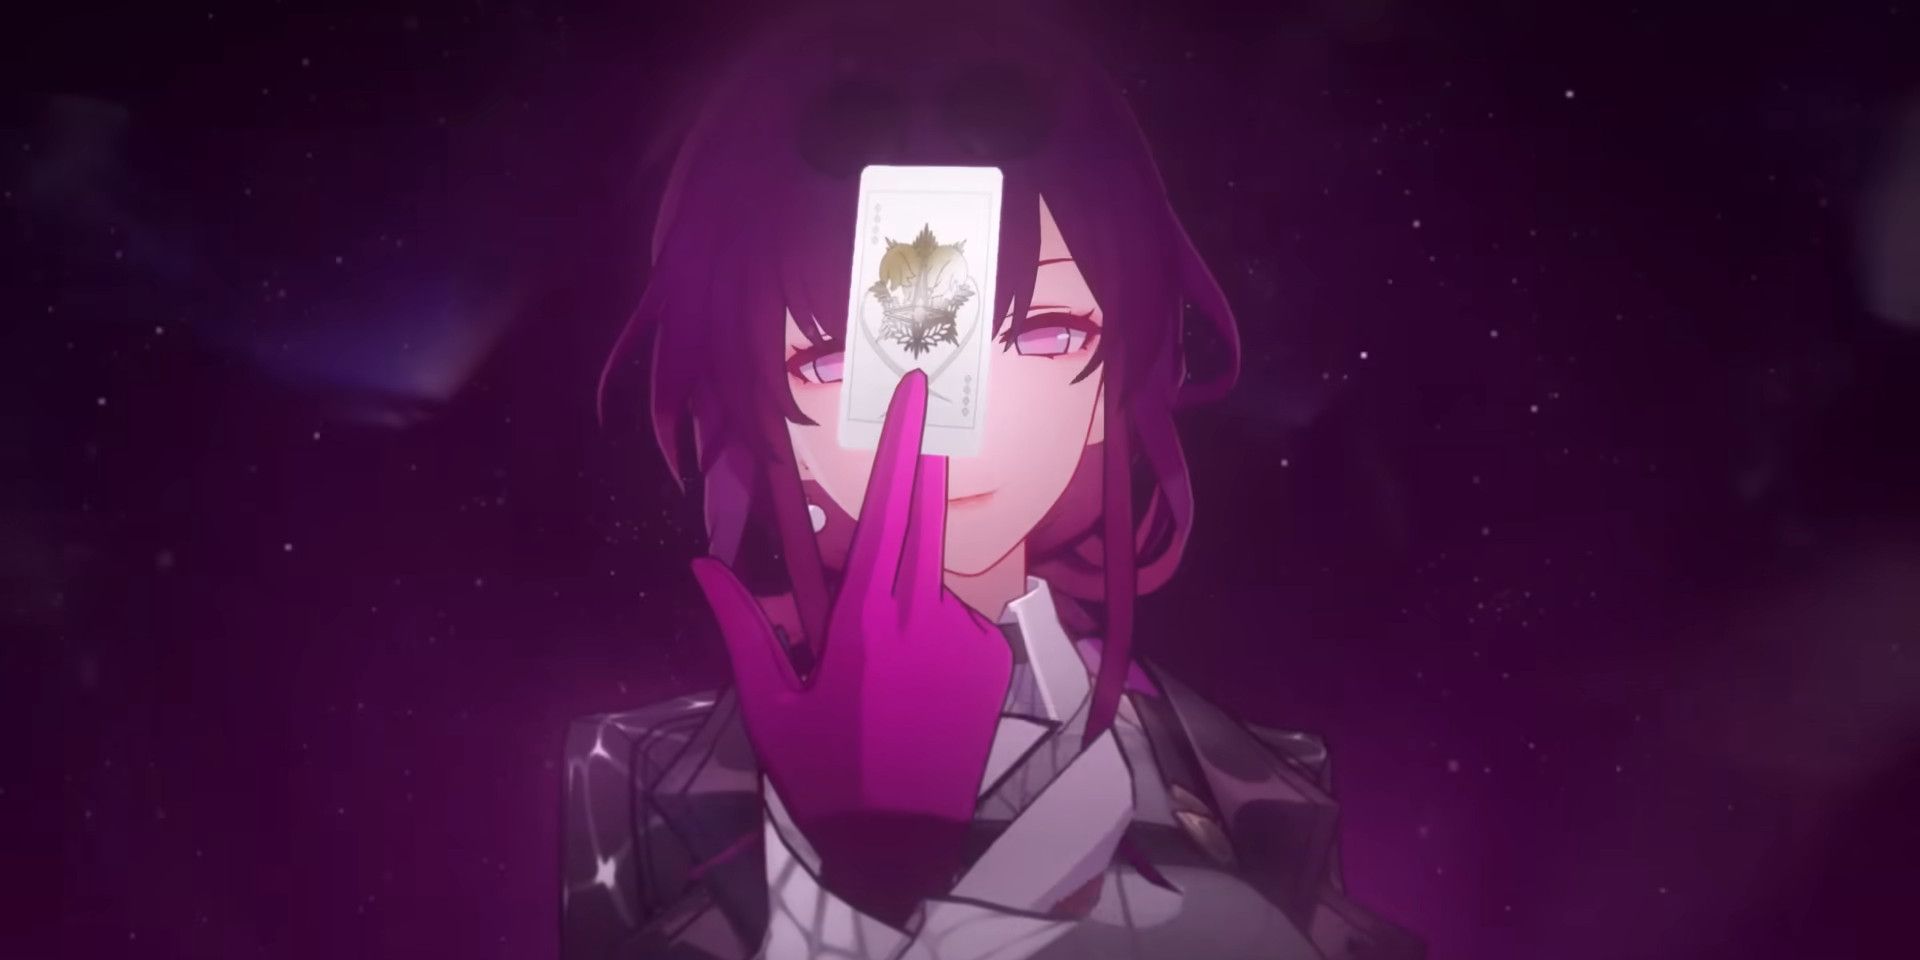 Kafka from Honkai: Star Rail holding a card up in front of her face between her middle and pointer fingers.